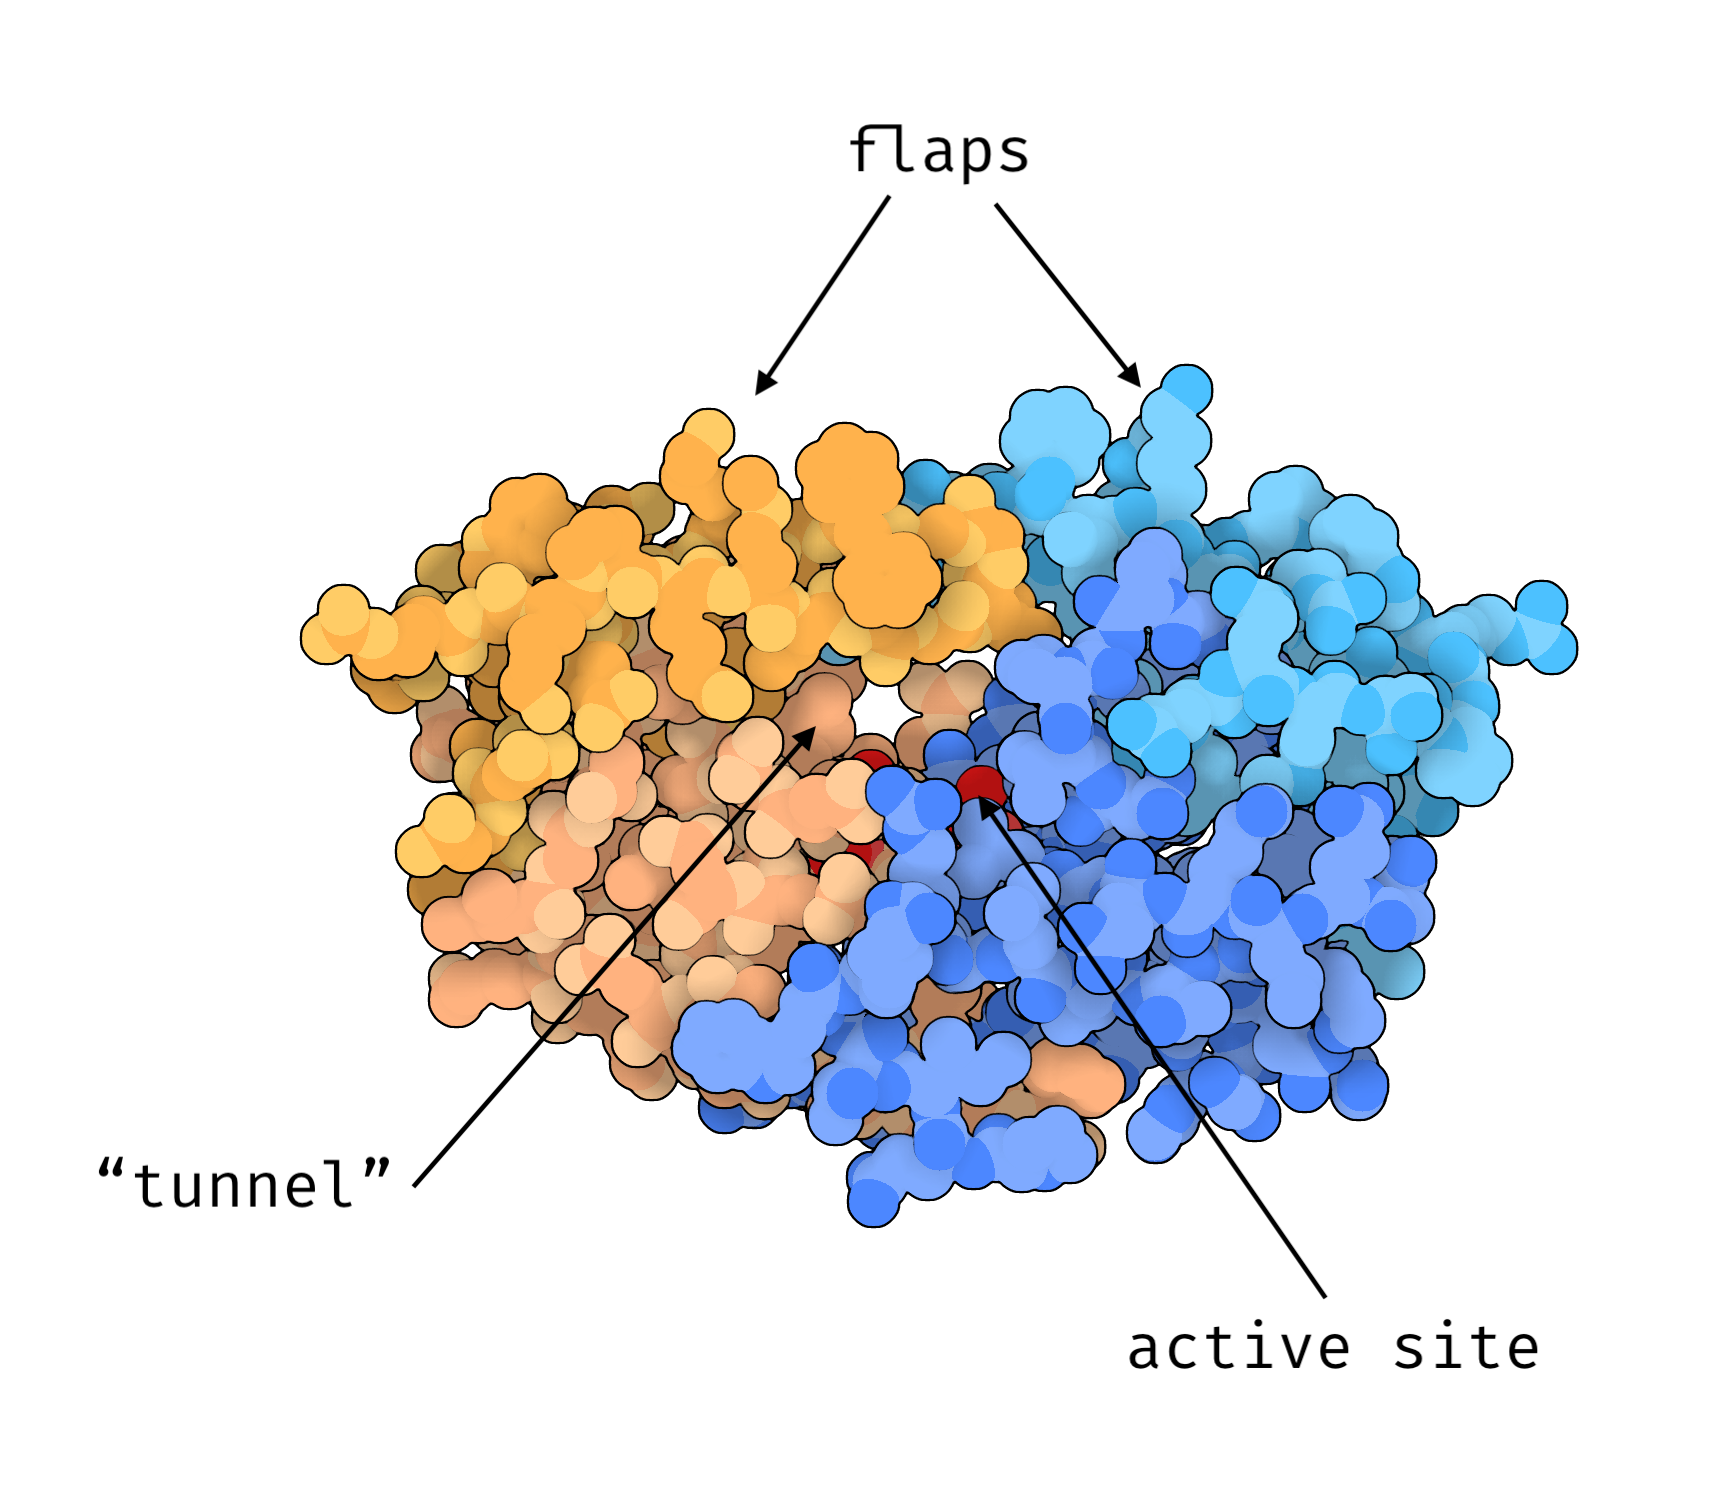 **3D structure of HIV-1 Protease.**  
The two identical chains are colored in orange and blue shades respectively. The flexible flaps form the the "roof" of a tunnel, at the bottom of which is the active site: 2 Asp residues, one on each chain. The 3D visualization was produced with Illustrate [@goodsellIllustrateSoftwareBiomolecular2019] using the [2p3b](https://www.rcsb.org/structure/2P3B) PDB structure.